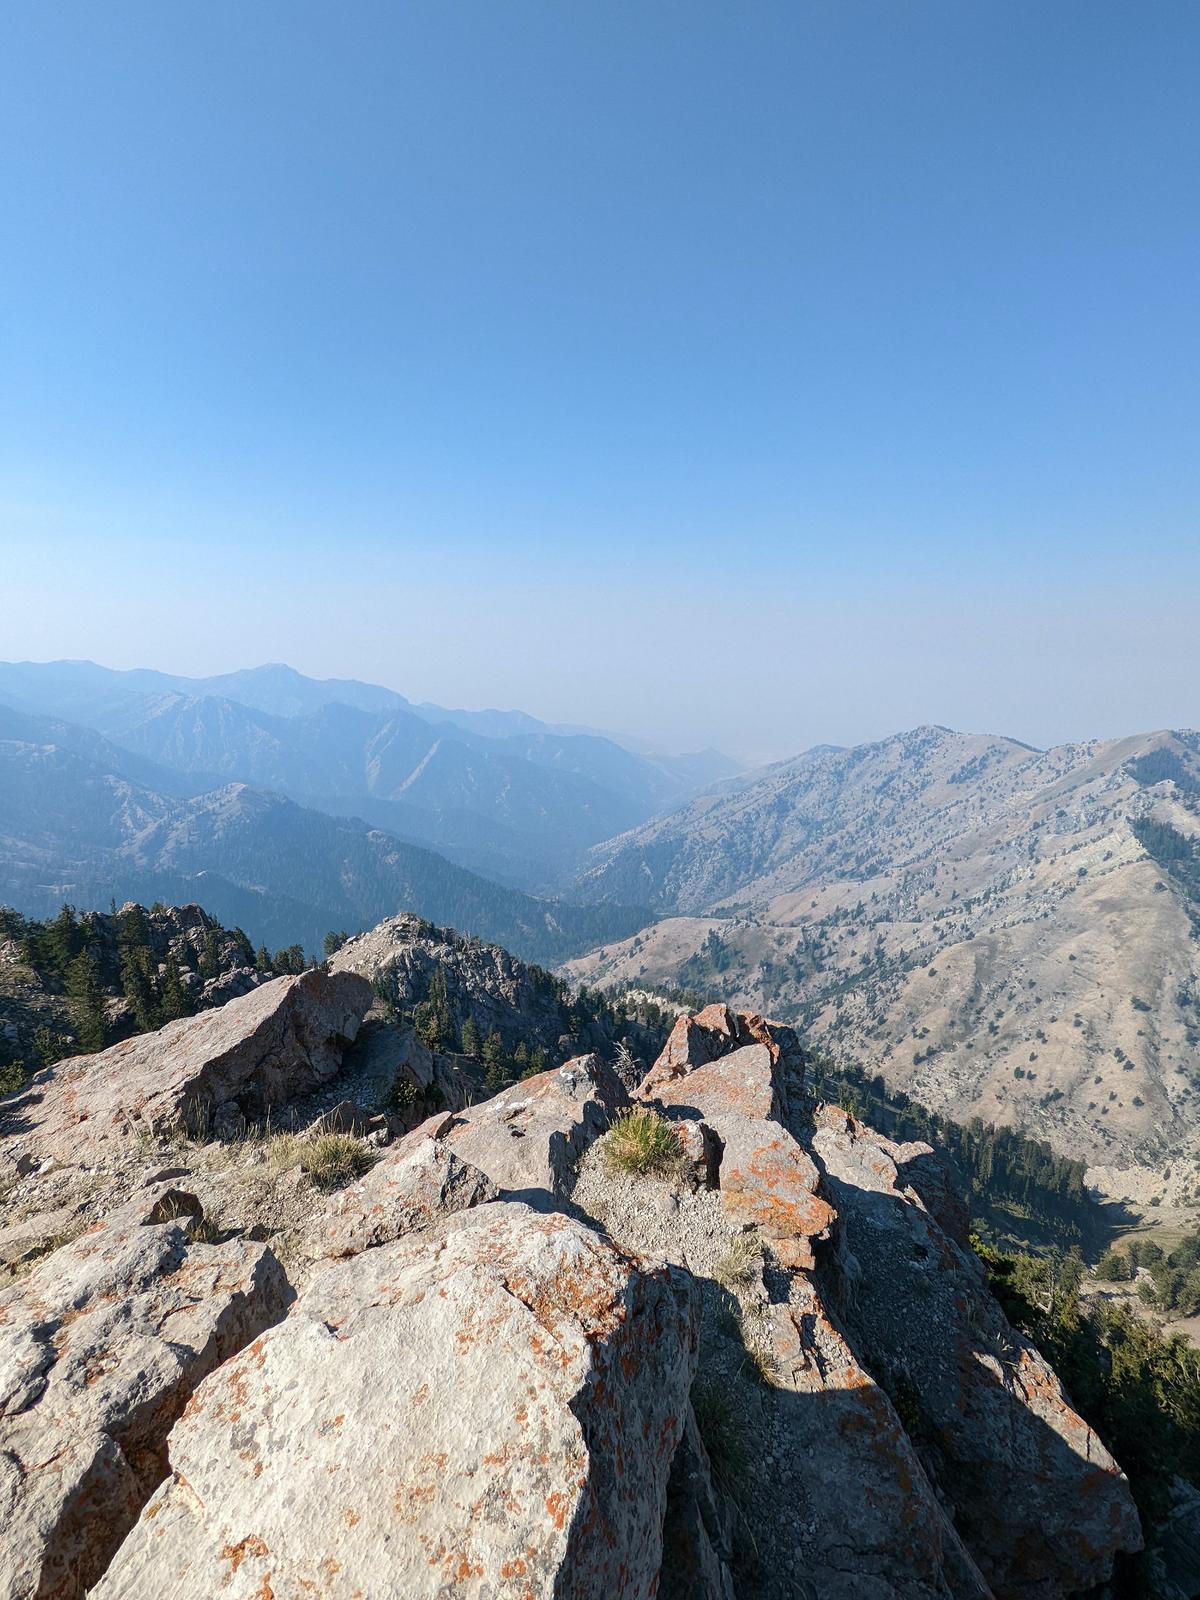 Naomi Peak, the highest point in Cache County, Utah. (Dreamstime/TNS)